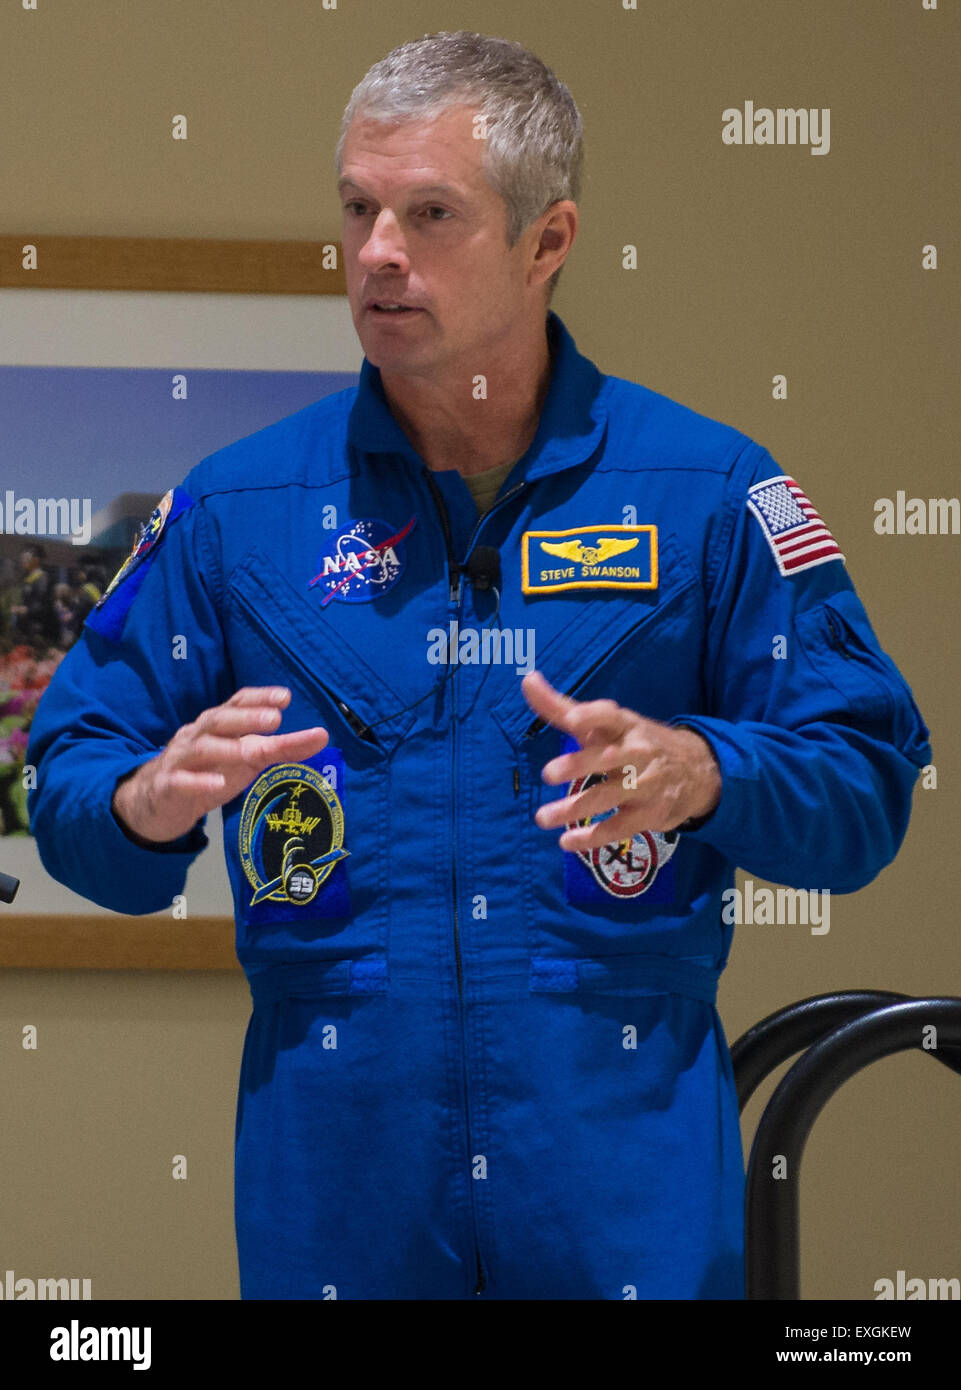 NASA astronaut Steve Swanson speaks about his time aboard the International Space Station during the TouchTomorrow Festival, held in conjunction with the 2015 Sample Return Robot Challenge, Saturday, June 13, 2015 at the Worcester Polytechnic Institute (WPI) in Worcester, Mass.  Sixteen teams competed for a $1.5 million NASA prize purse. Teams will be required to demonstrate autonomous robots that can locate and collect samples from a wide and varied terrain, operating without human control. The objective of this NASA-WPI Centennial Challenge is to encourage innovations in autonomous navigatio Stock Photo